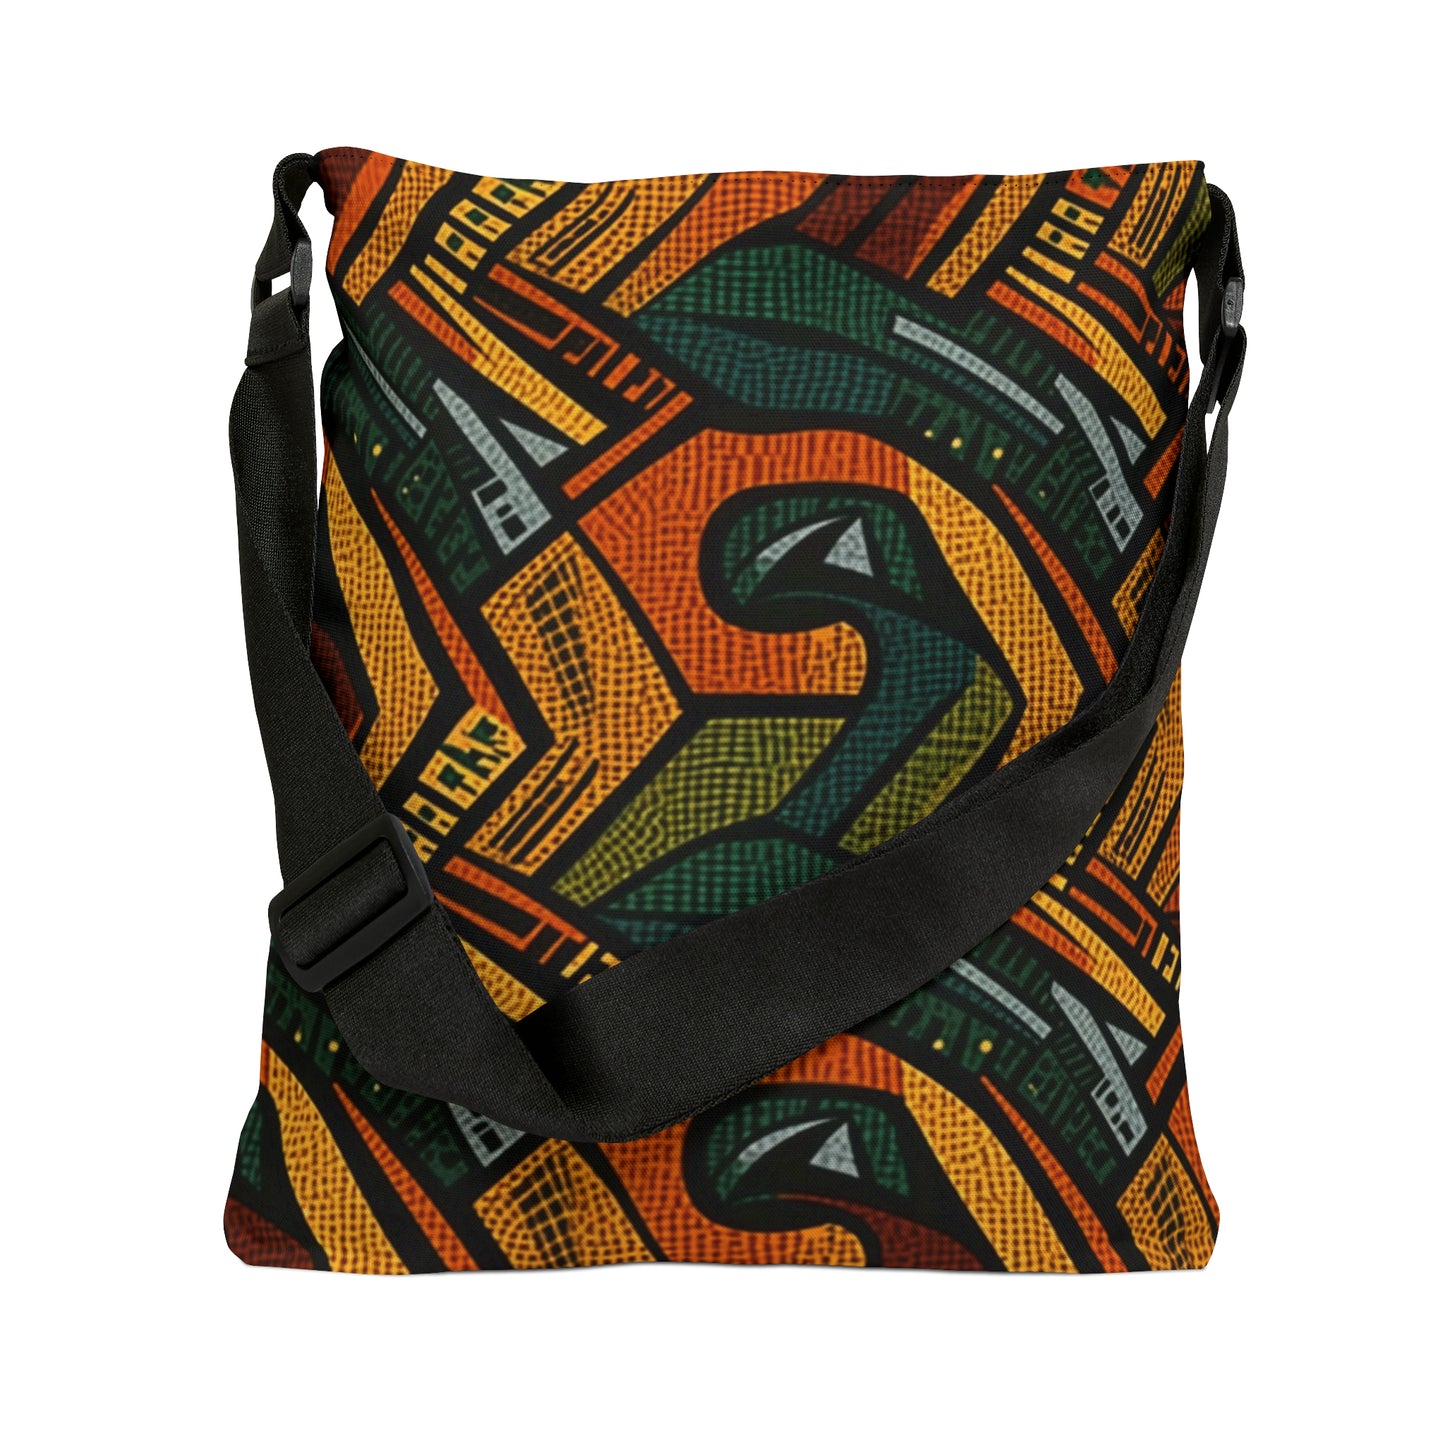 1960-1970s Style African Ornament Textile - Bold, Intricate Pattern - Adjustable Tote Bag (AOP)